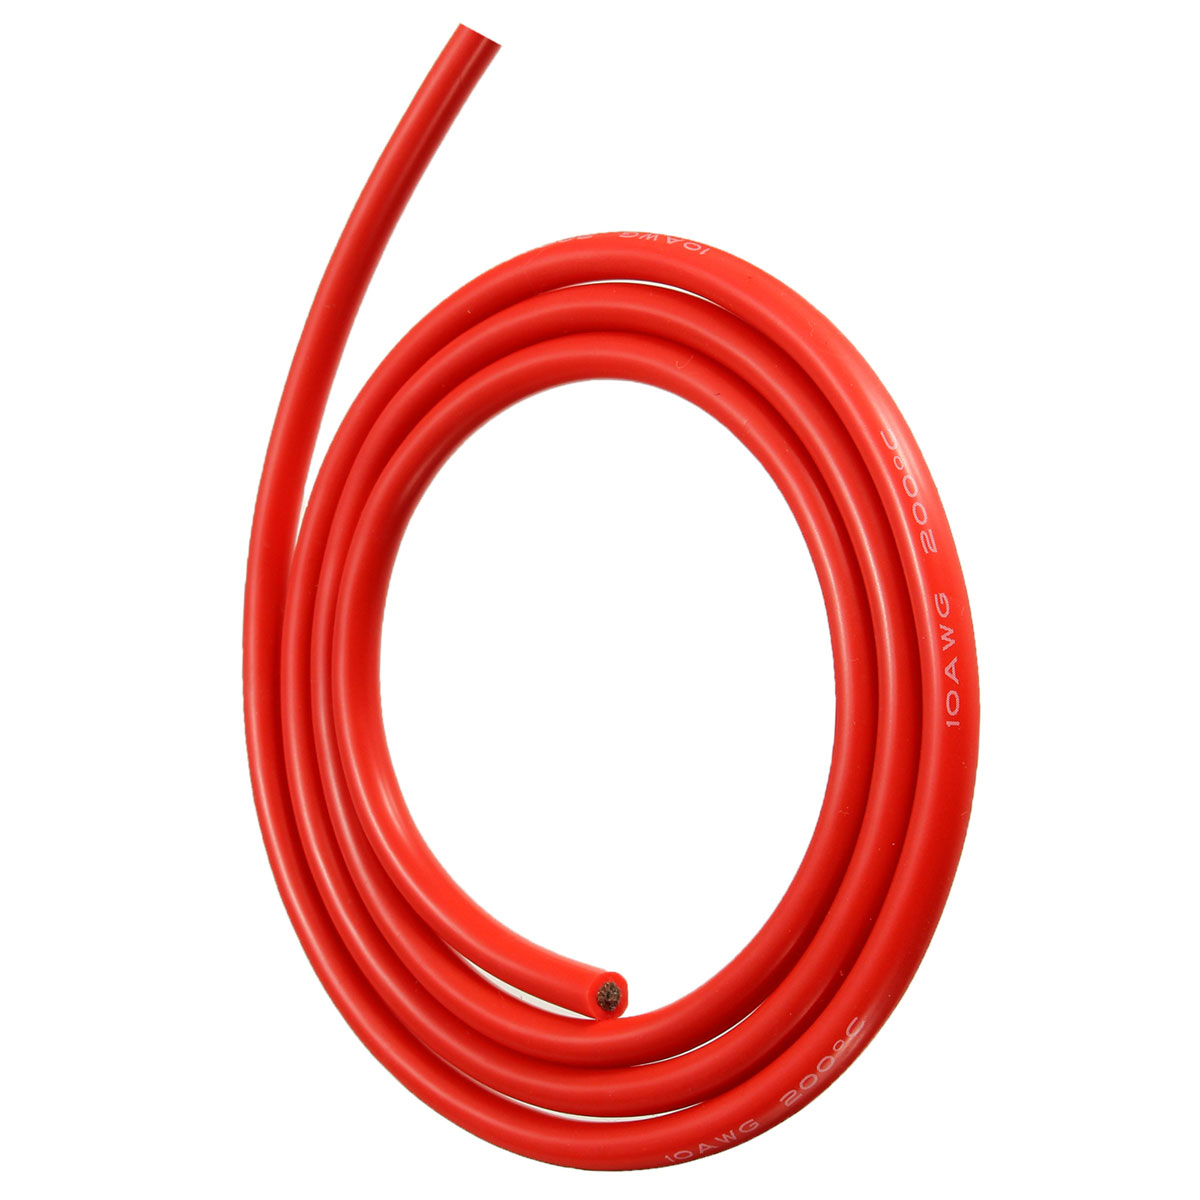 DANIU-5-Meter-Red-Silicone-Wire-Cable-10121416182022AWG-Flexible-Cable-1170292-6